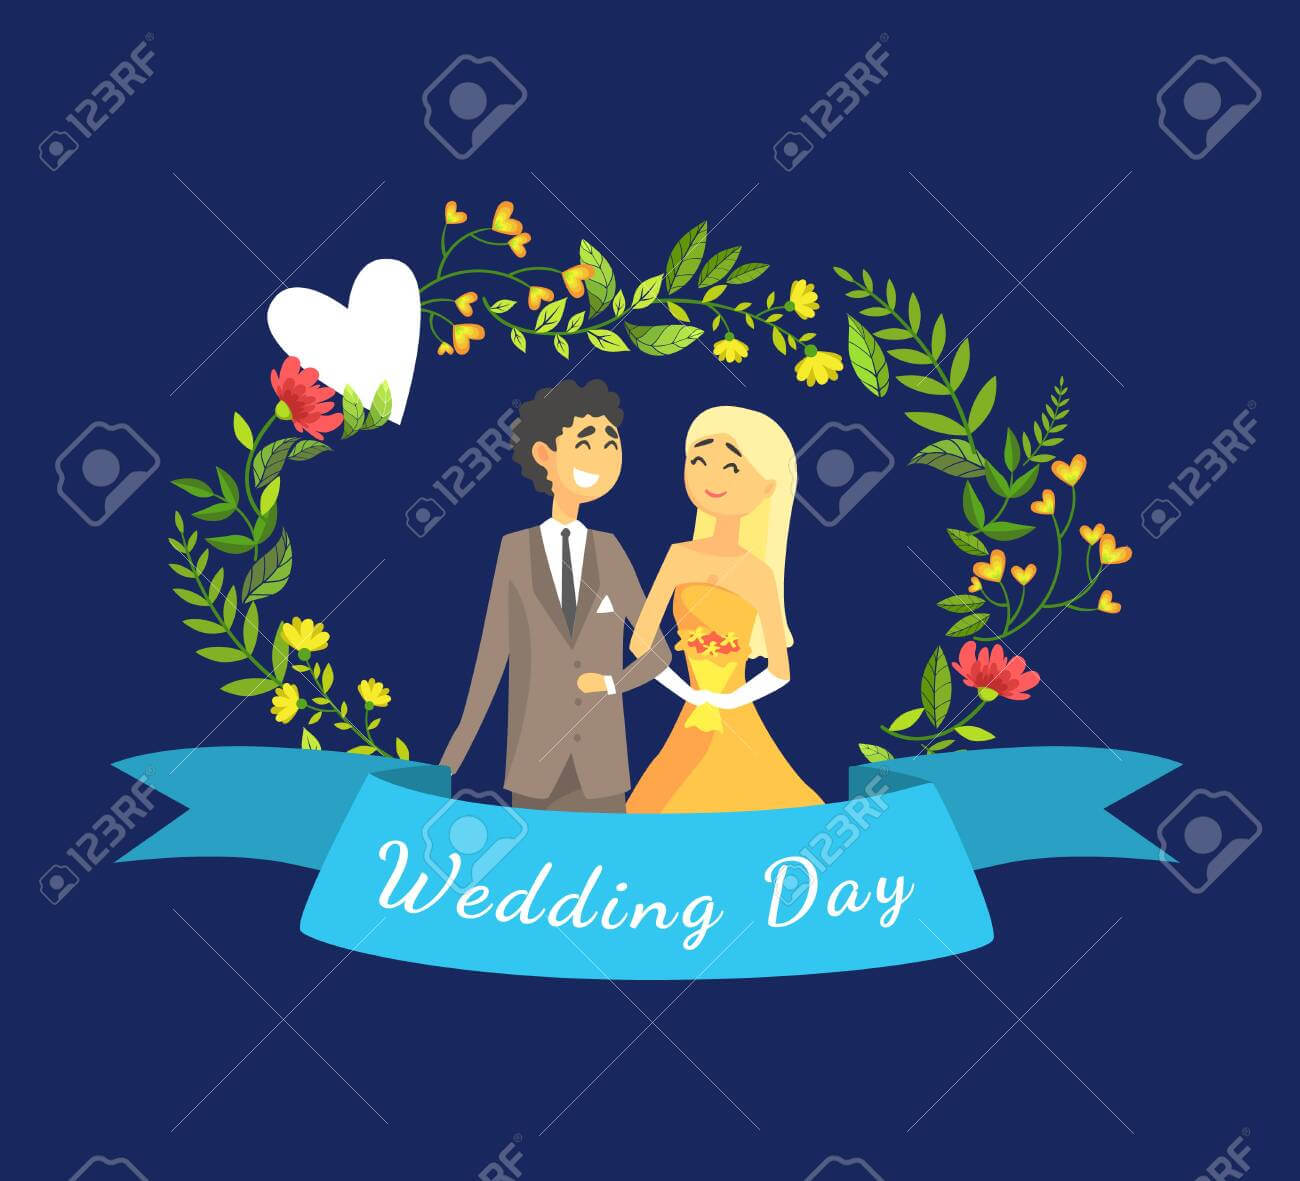 Wedding Day Banner Template With Happy Just Married Couple, Bride.. Within Bride To Be Banner Template